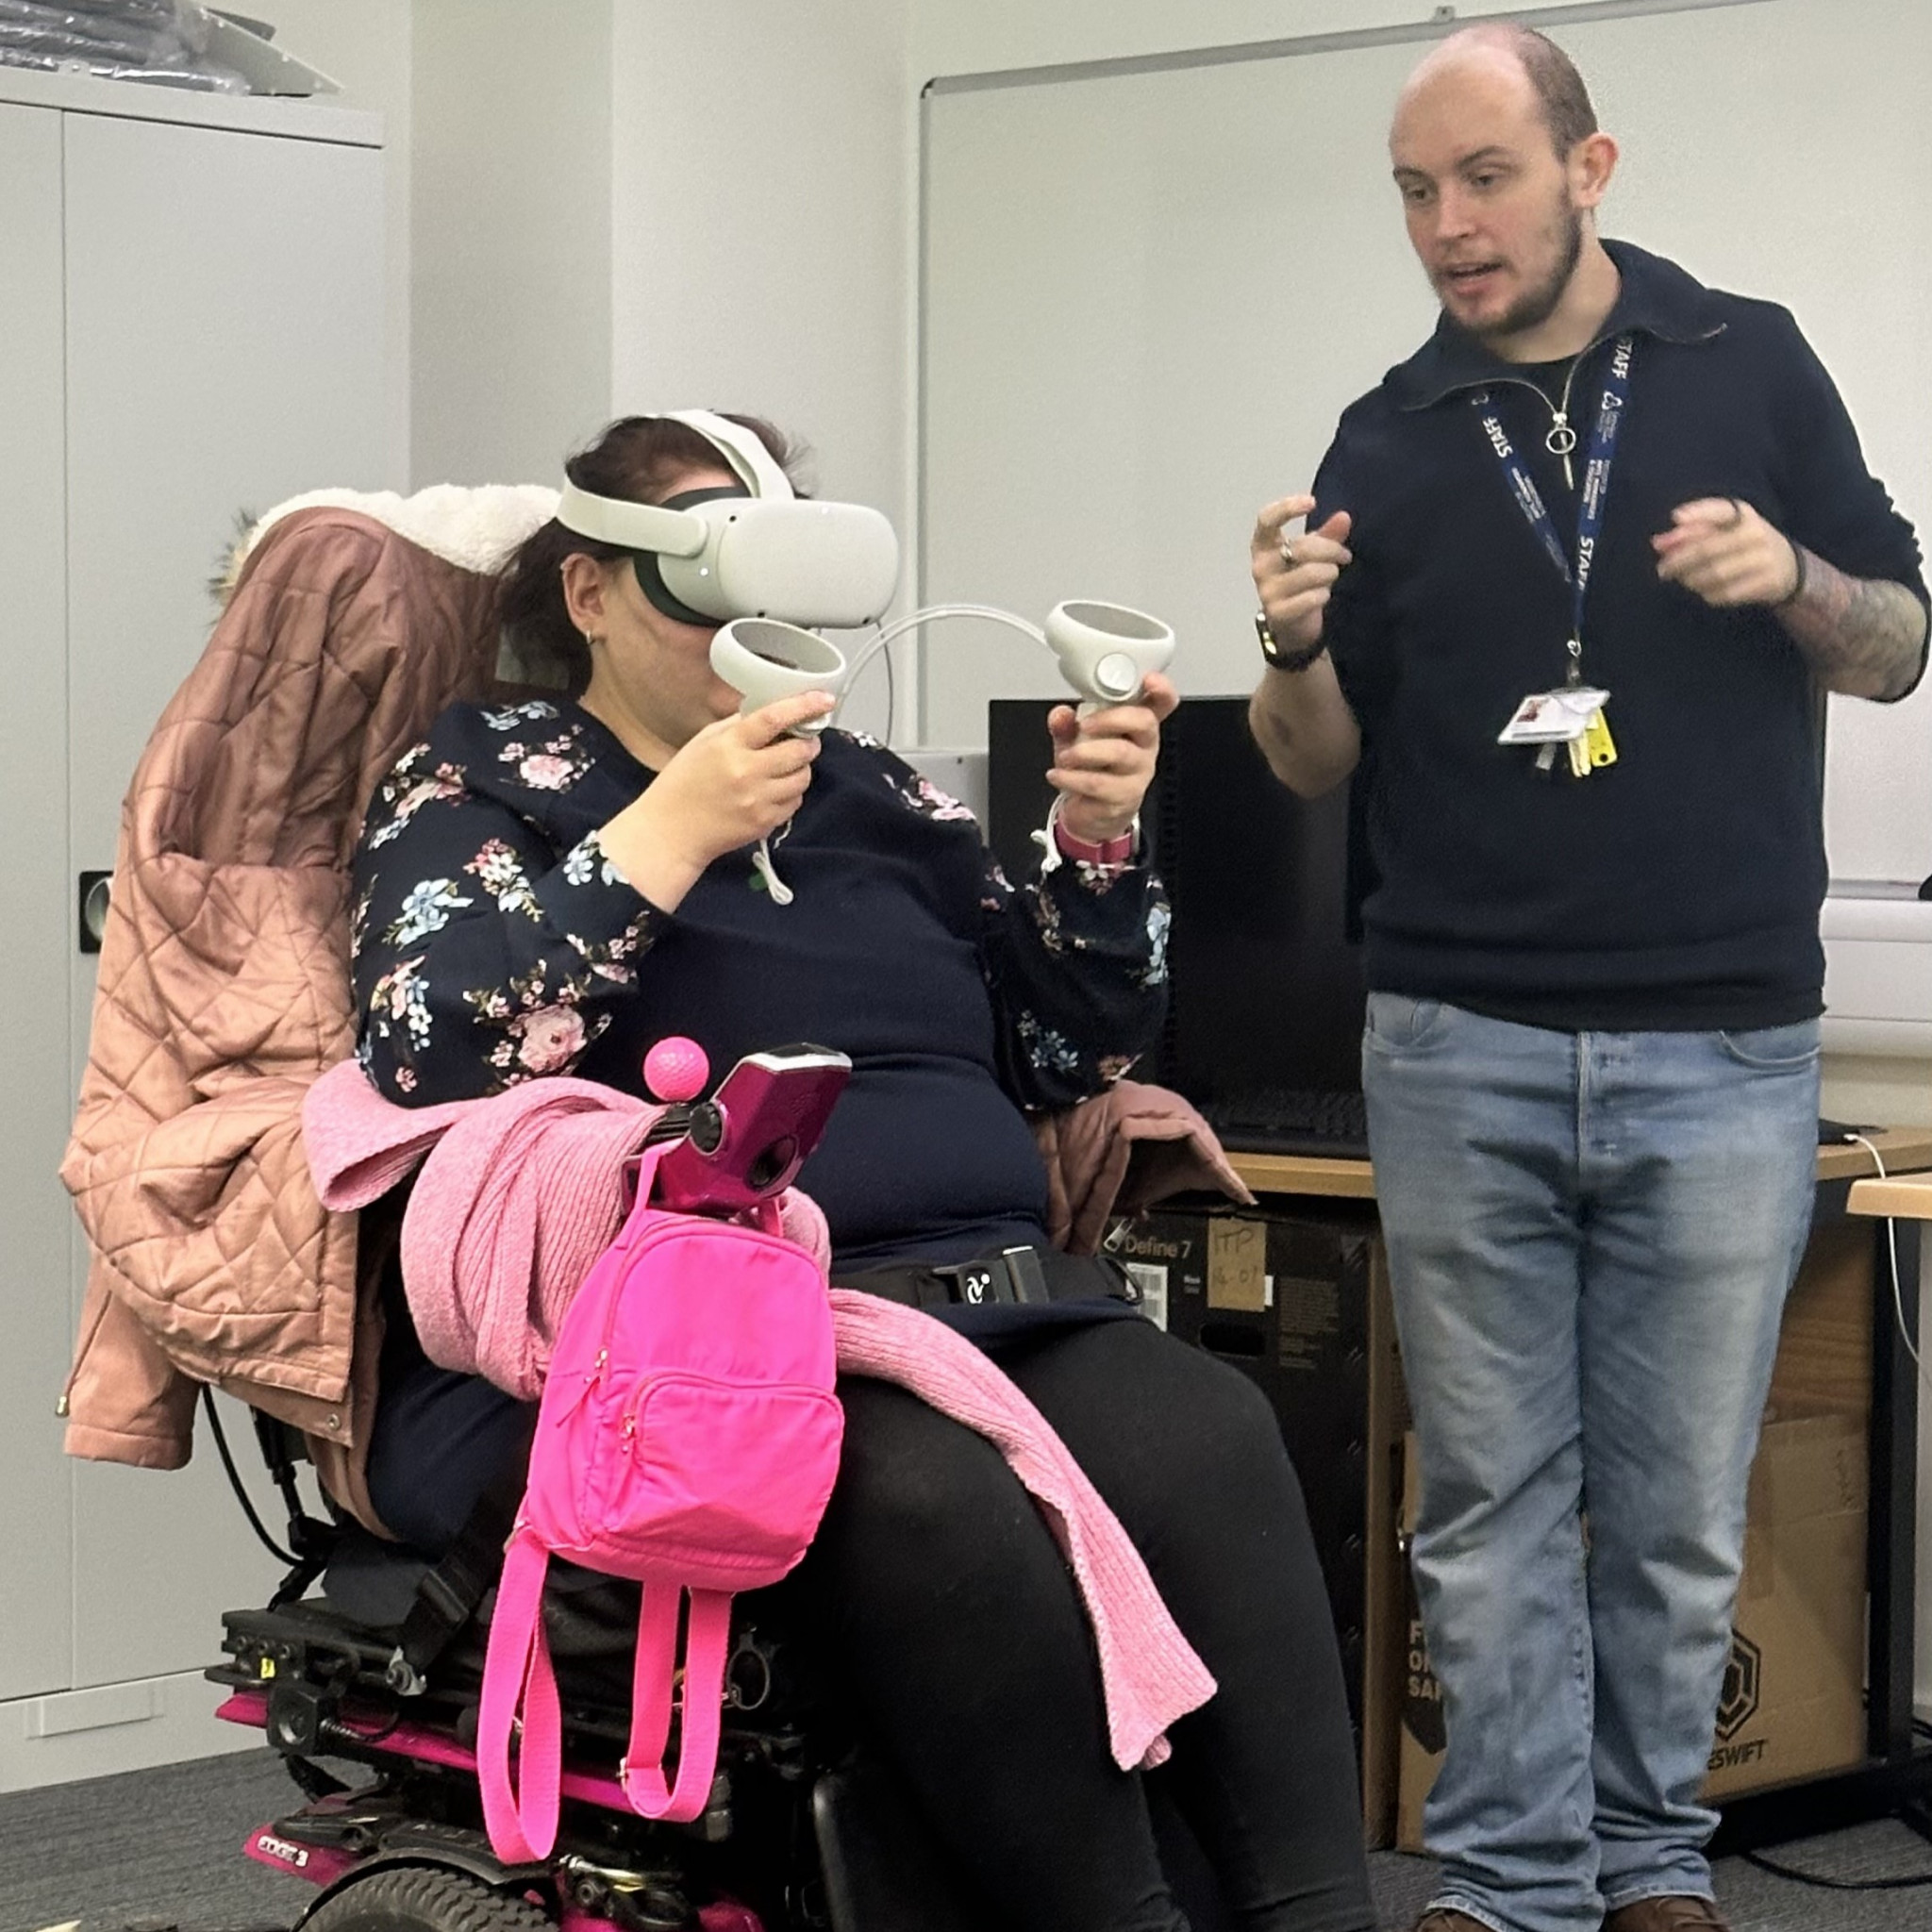 Students explore the role of virtual reality in speech and language development with the Creative Innovation Hub